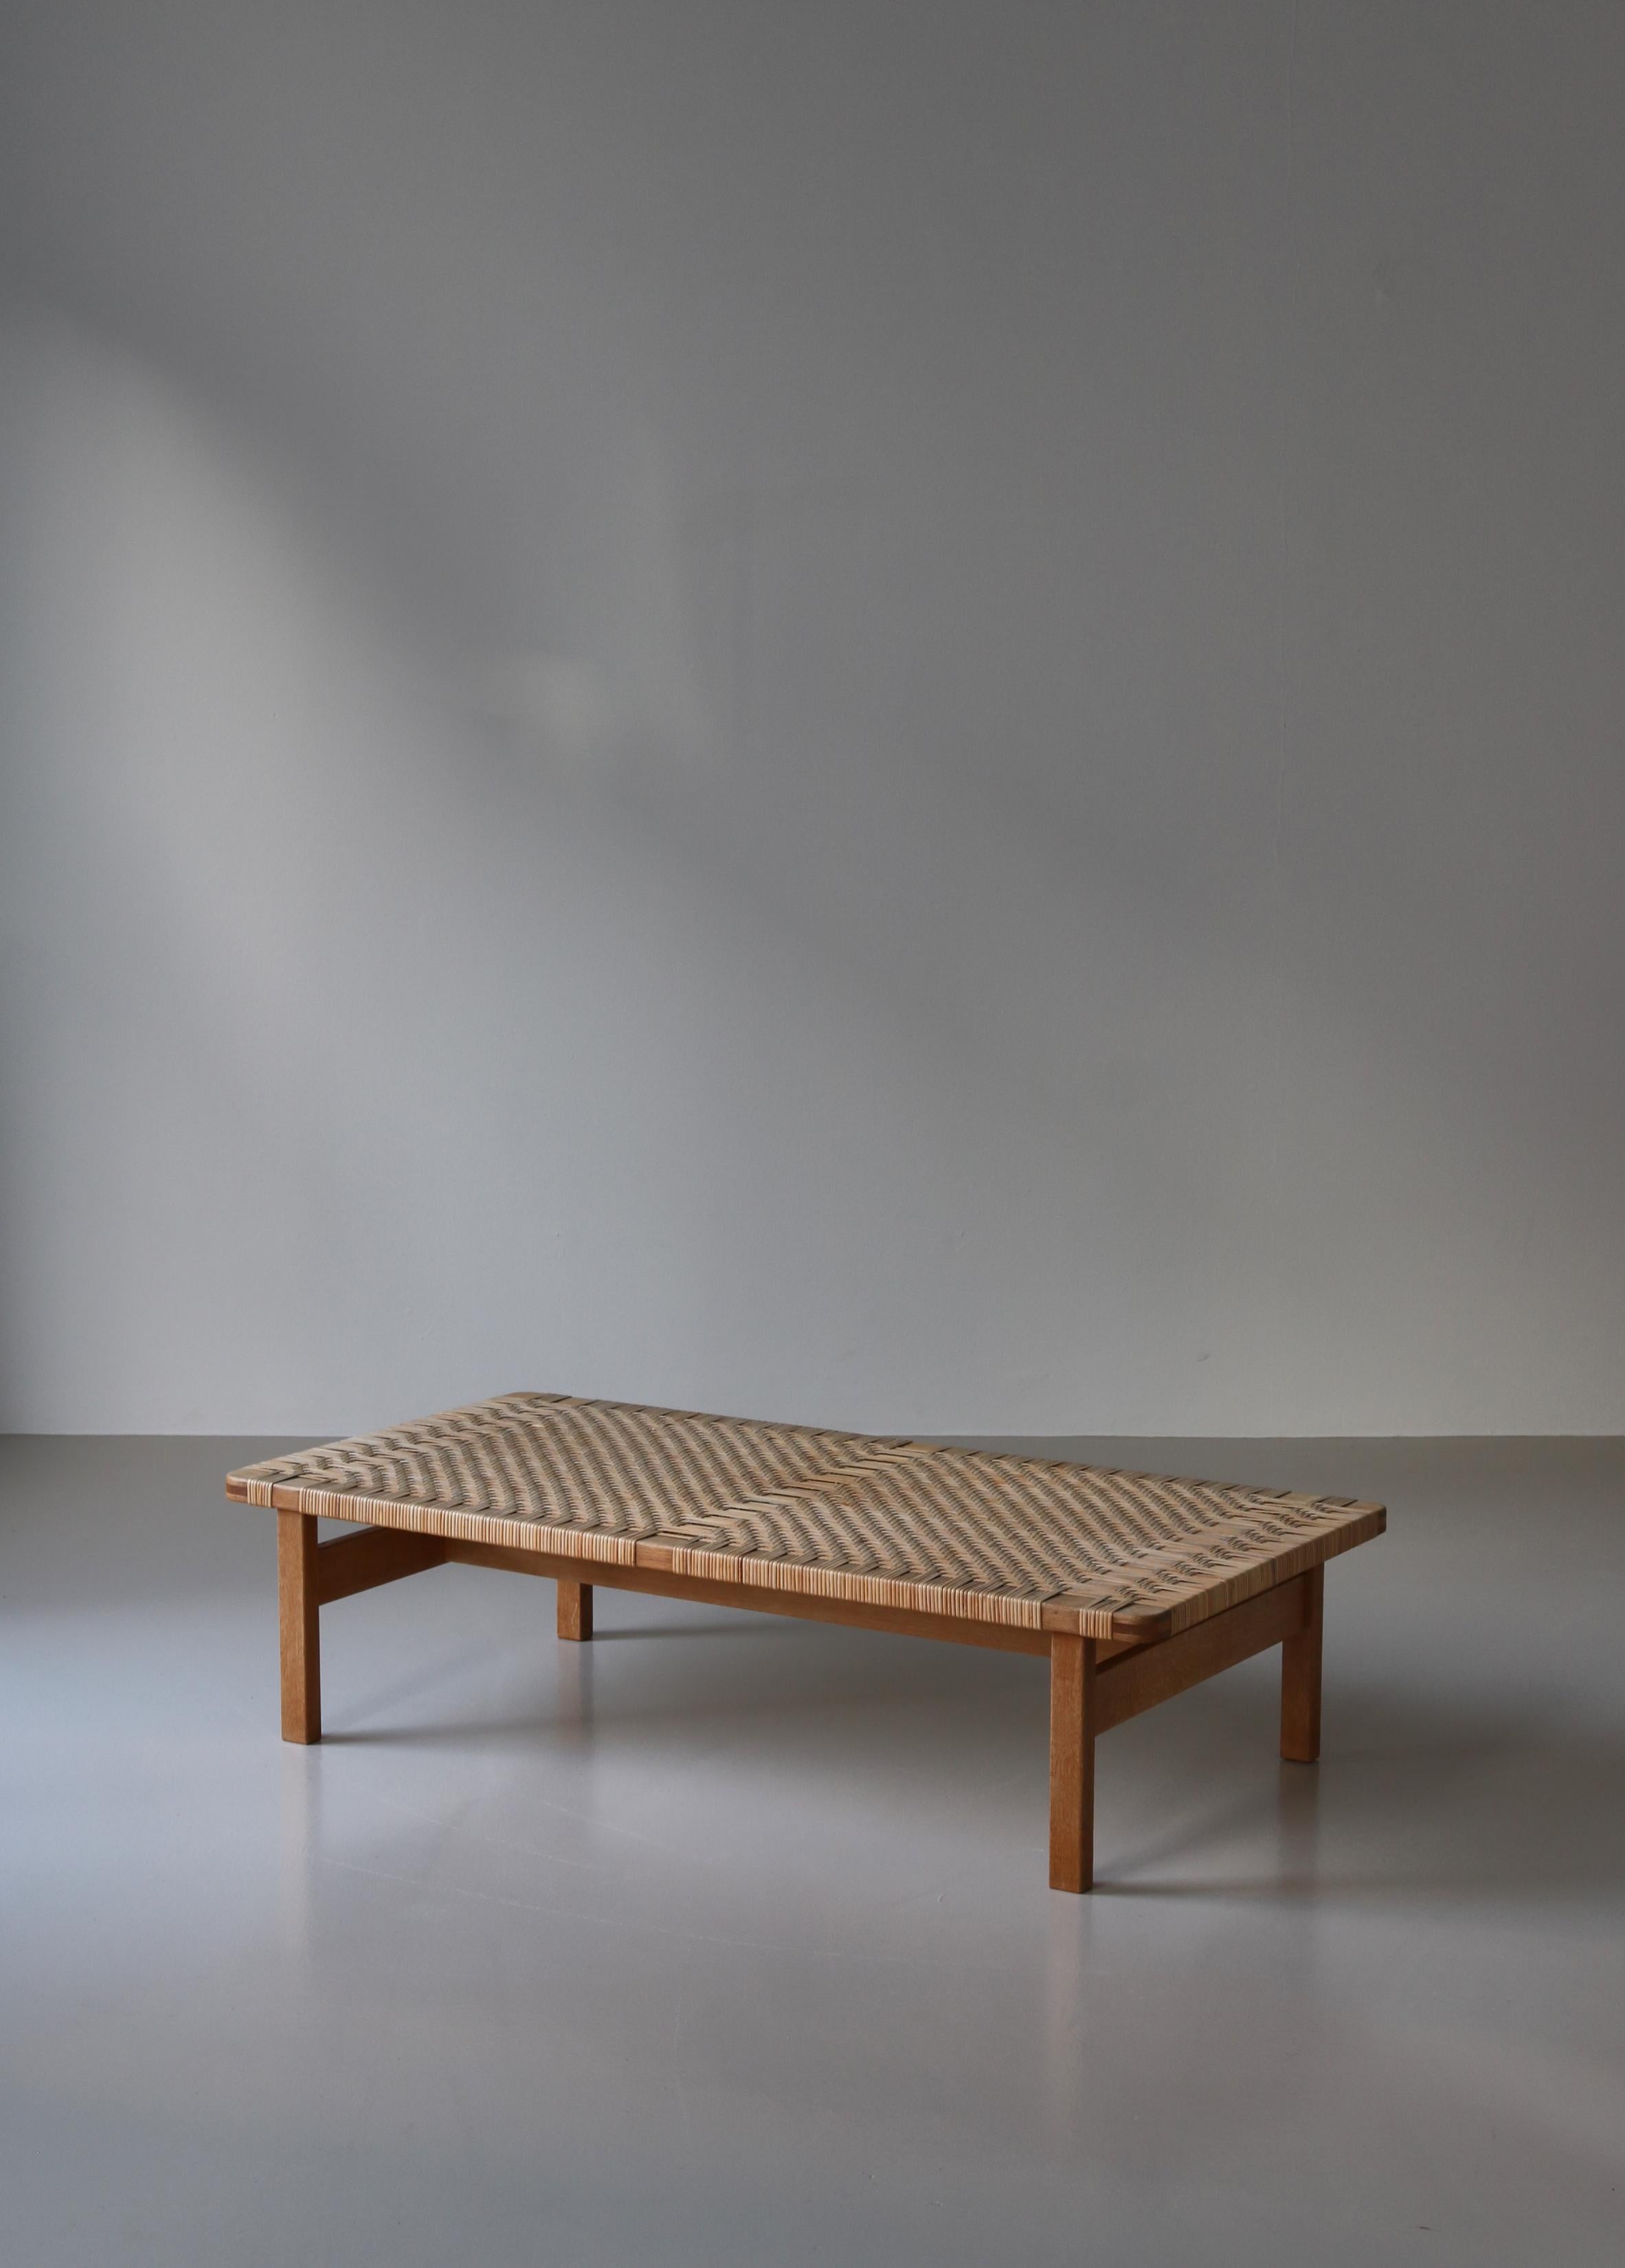 Danish Borge Mogensen Large Side Table or Bench in Oak and Rattan Cane, 1960s, Denmark For Sale